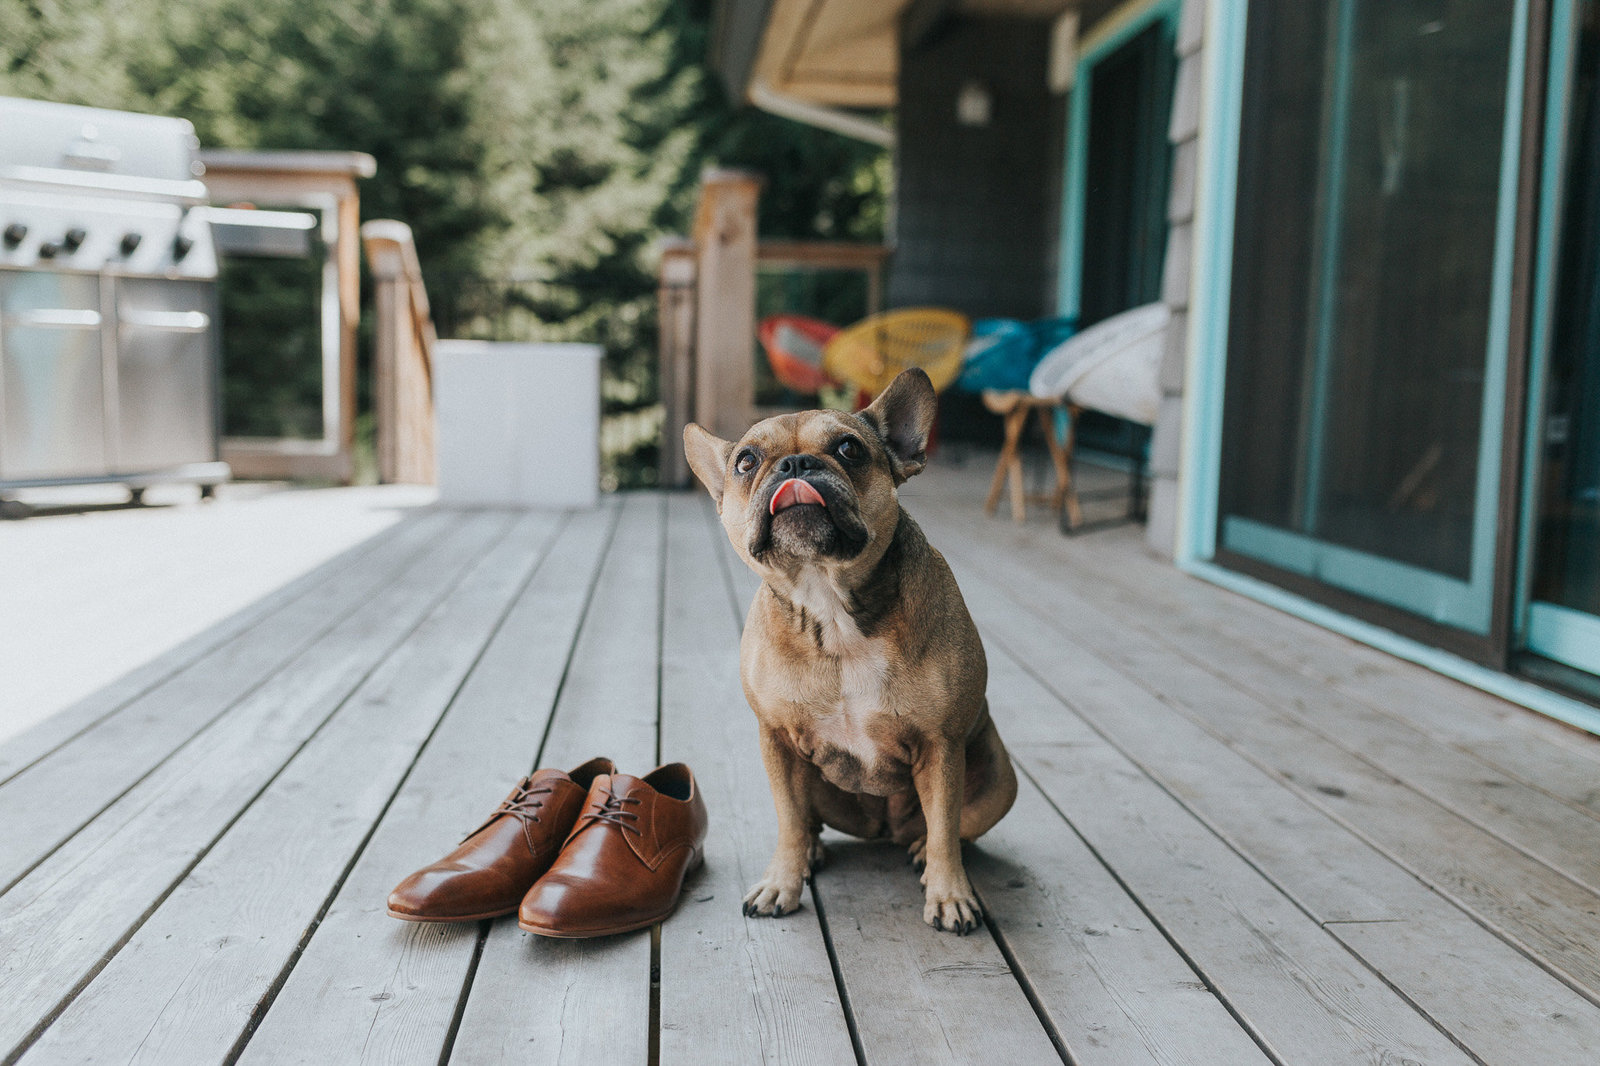 Dog and groom's shoes